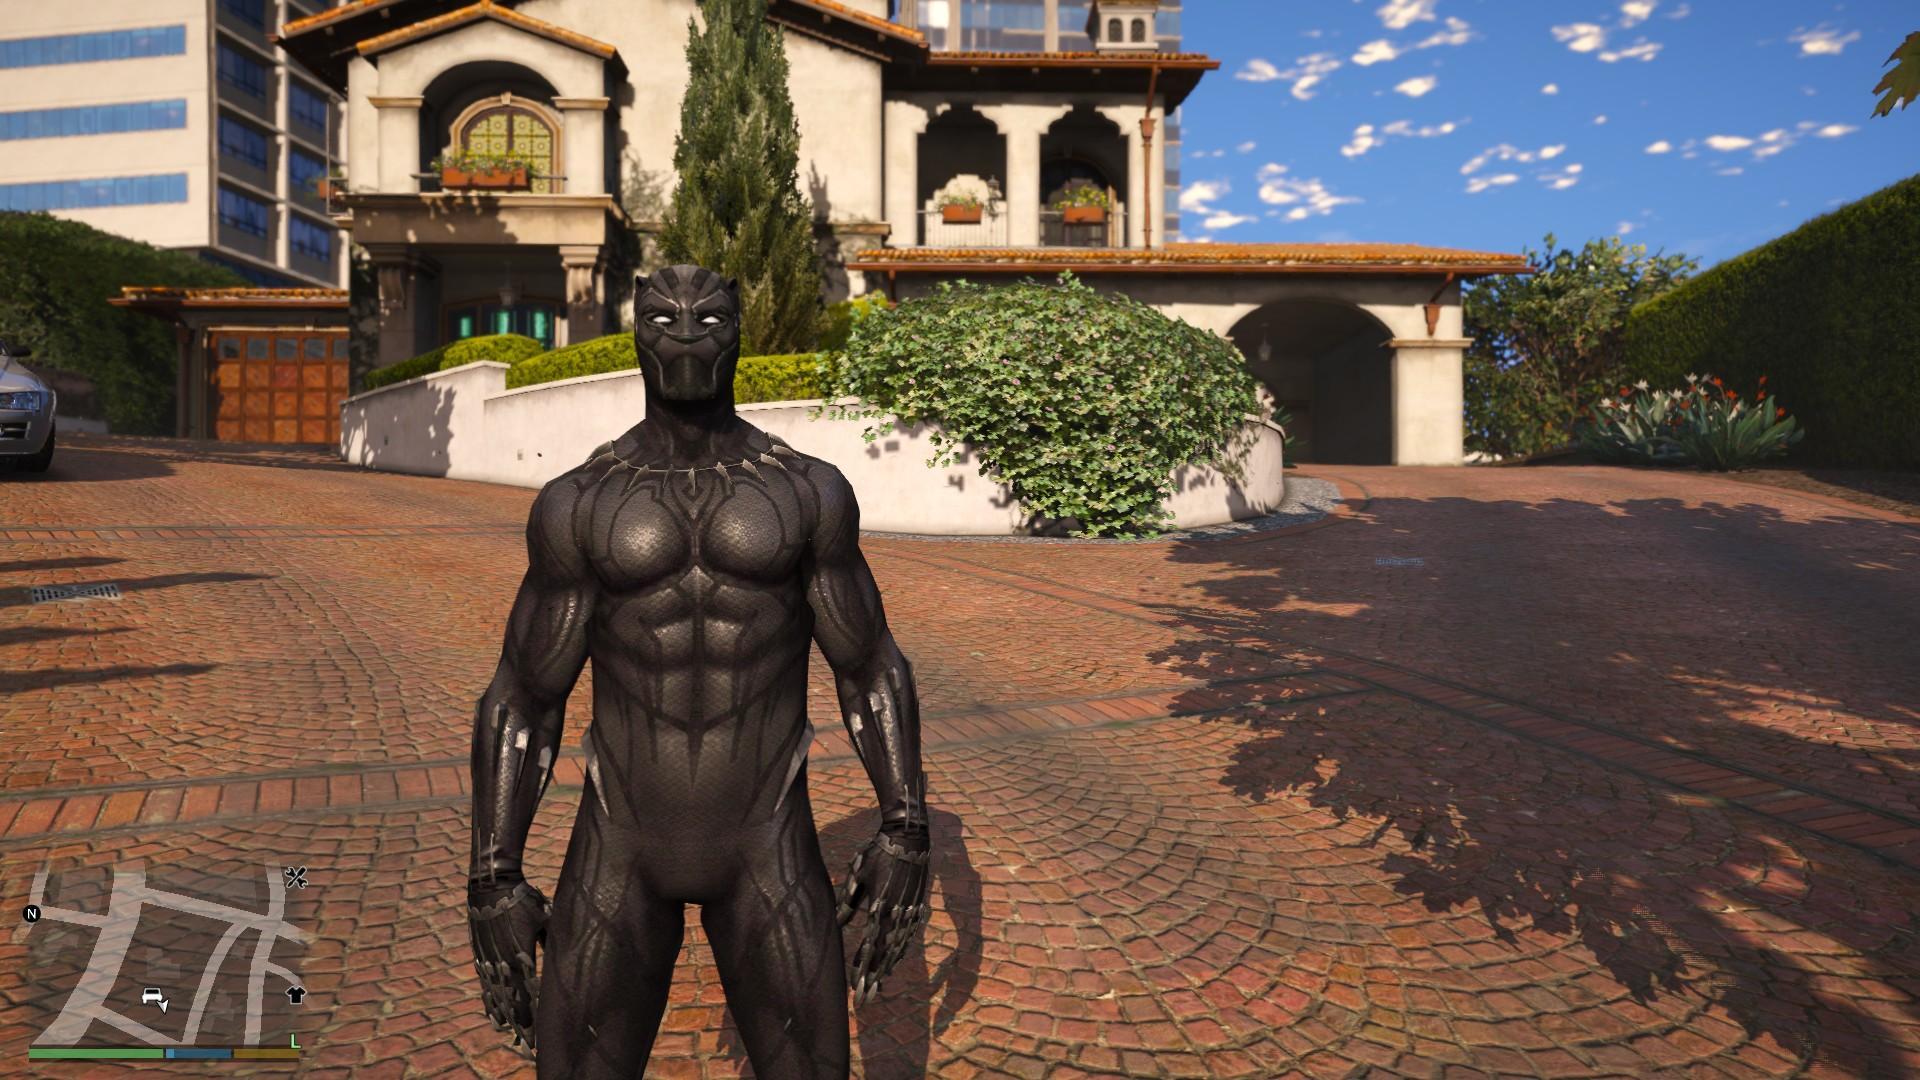 BLACK PANTHER FROM BLACK PANTHER MOVIE[Add-On / Replace PED]